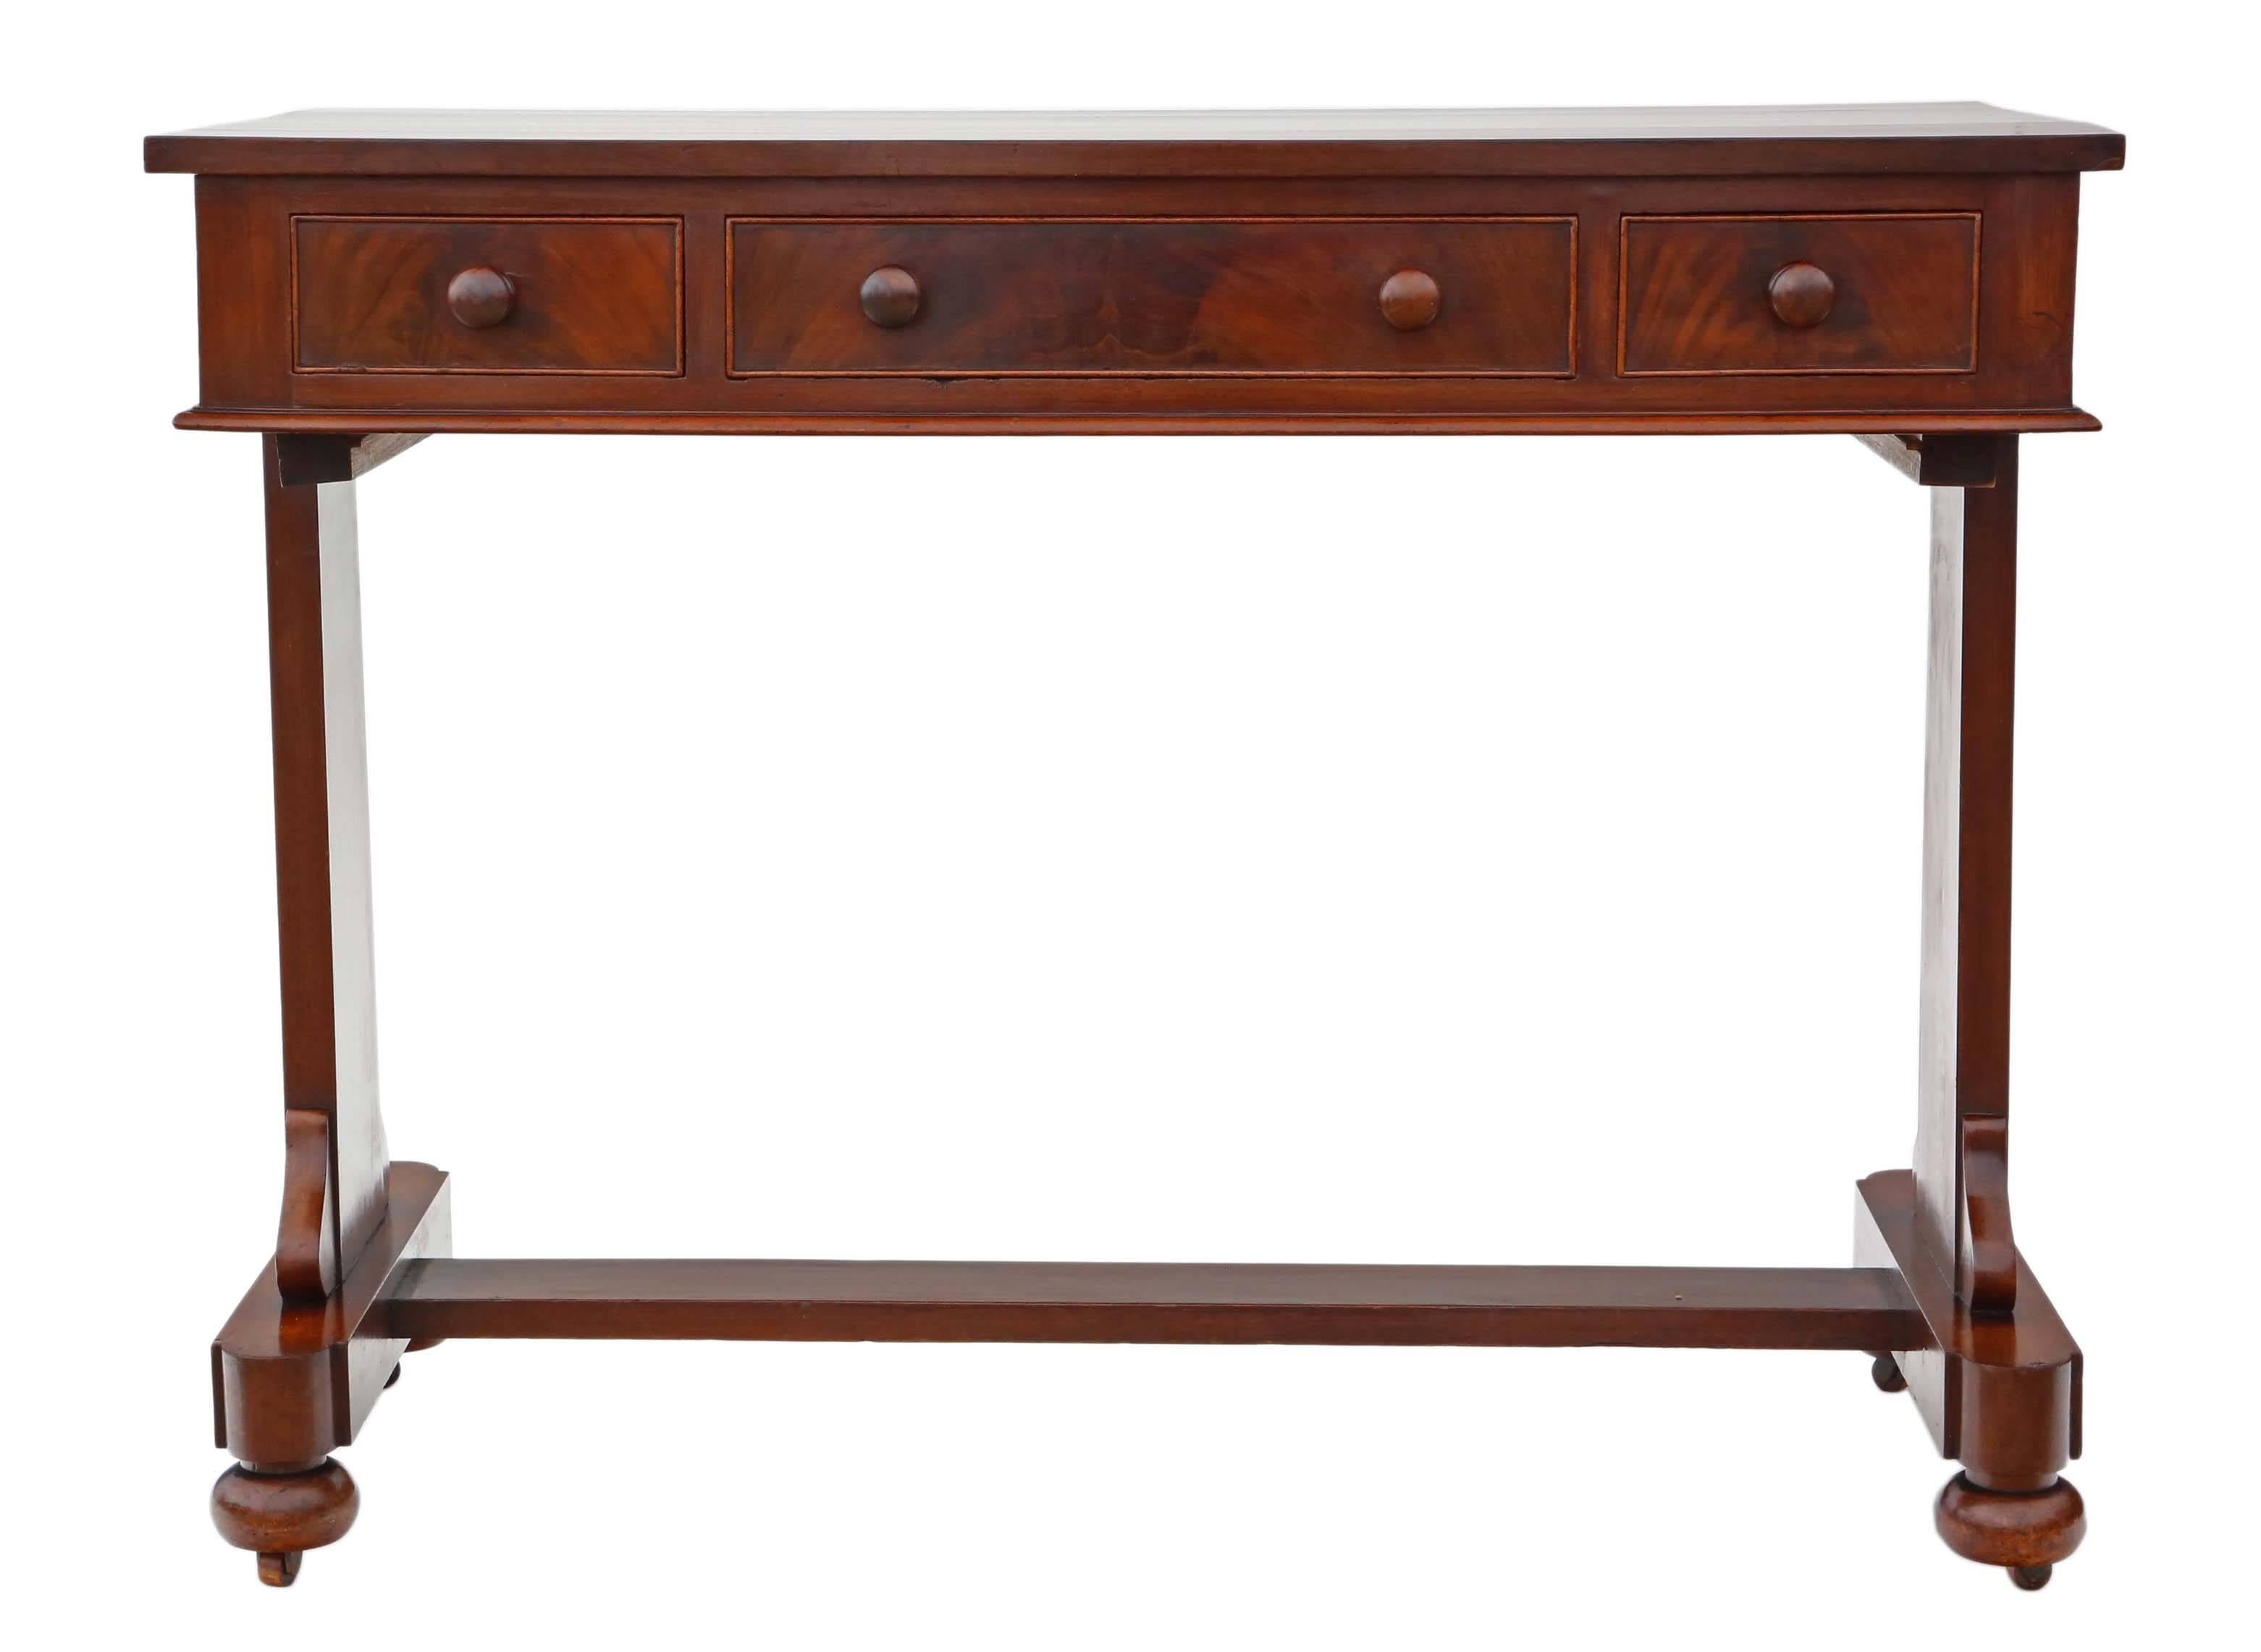 British Antique Quality Victorian circa 1860 Mahogany Desk or Writing Table For Sale